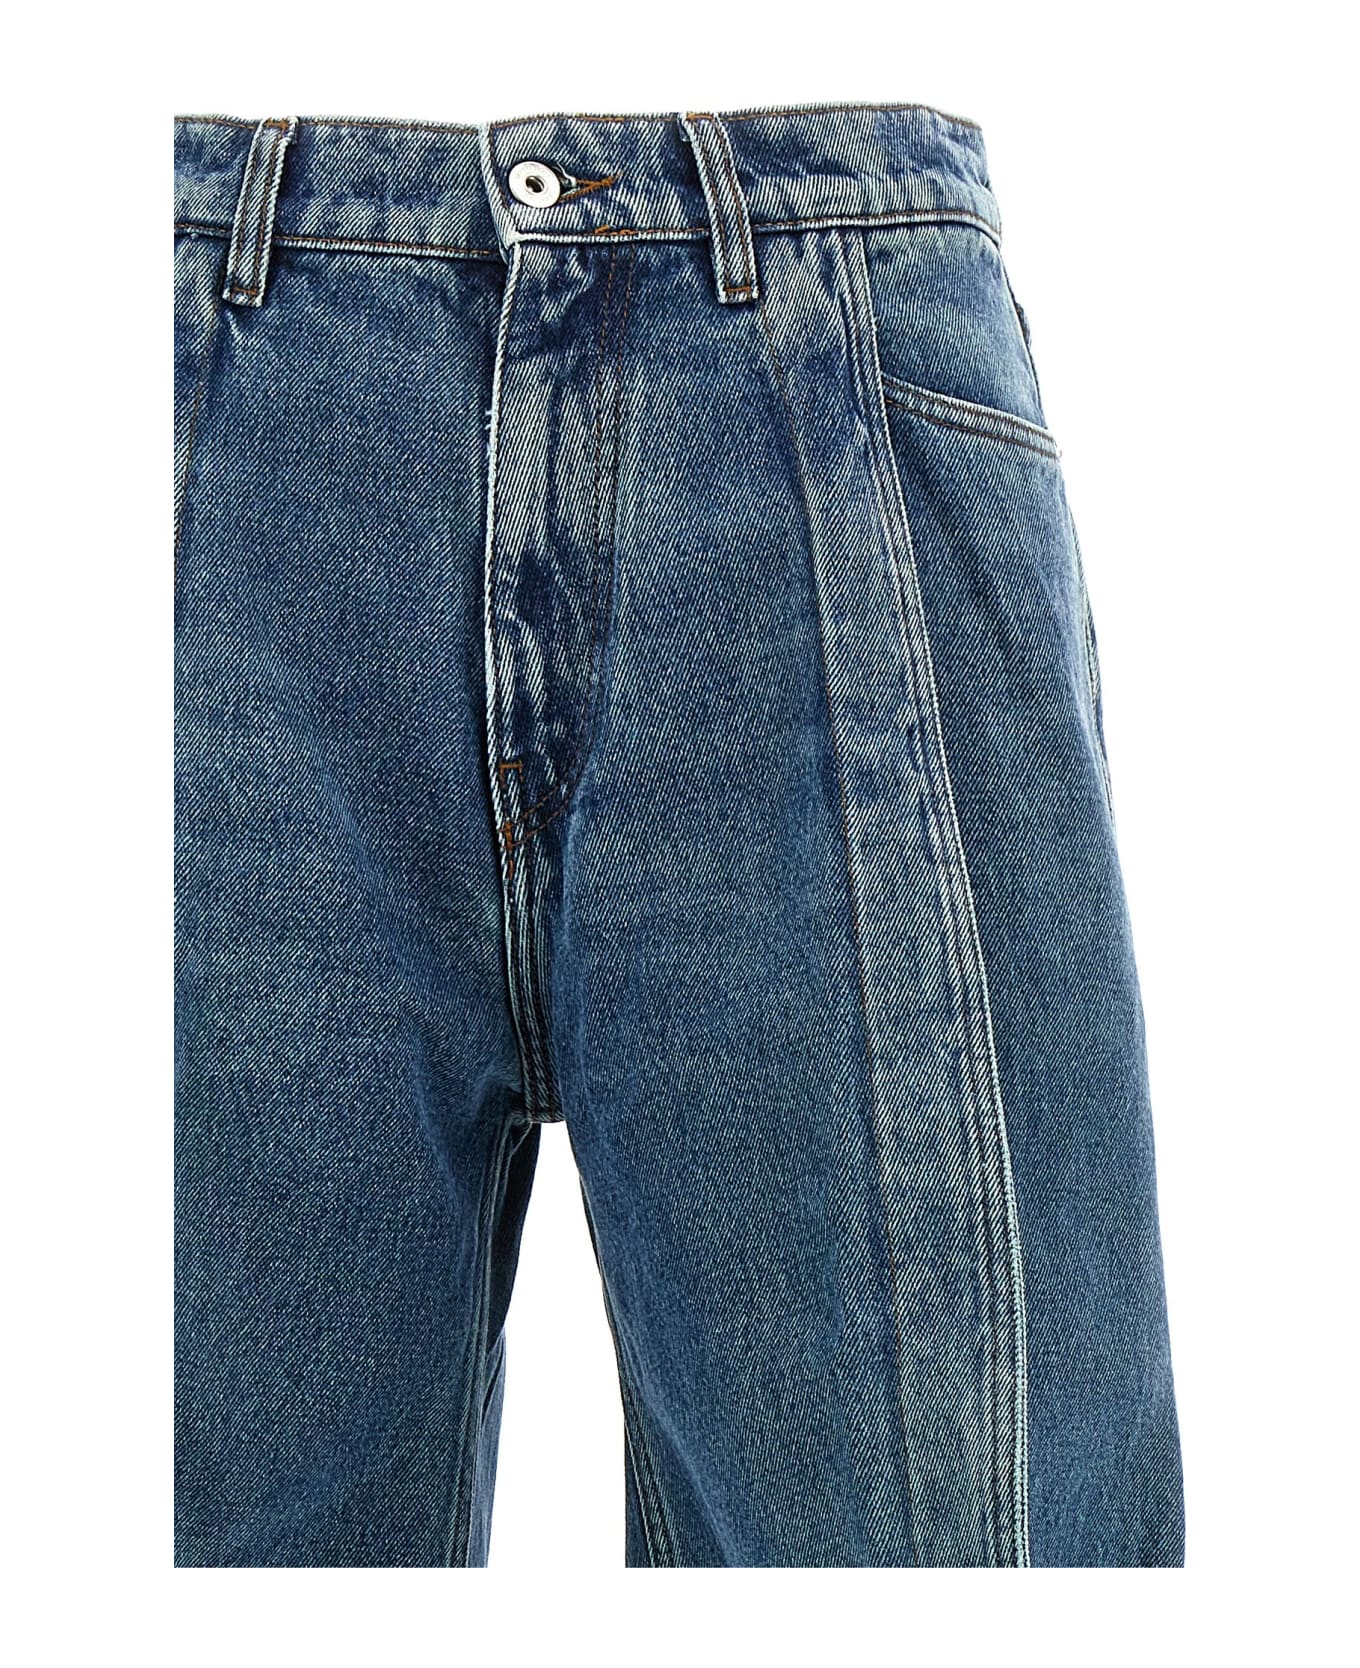 Y/Project 'evergreen Banana Jeans' Jeans - Blue